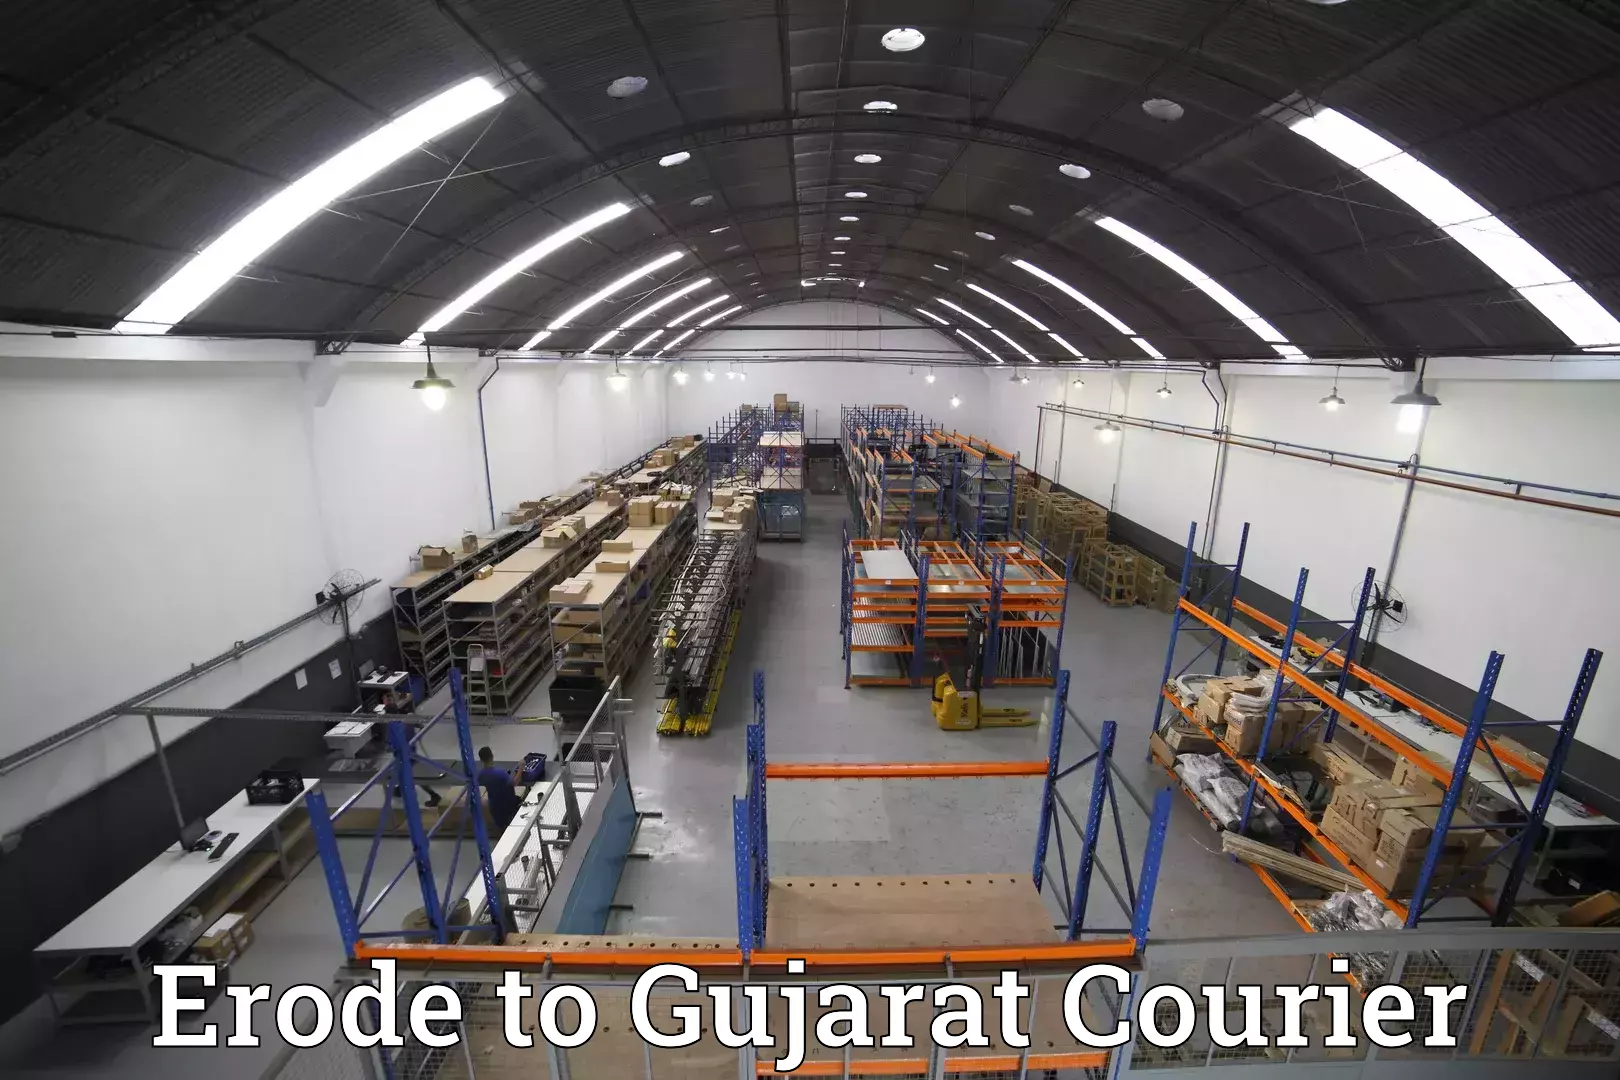 Luggage shipping specialists Erode to Gujarat